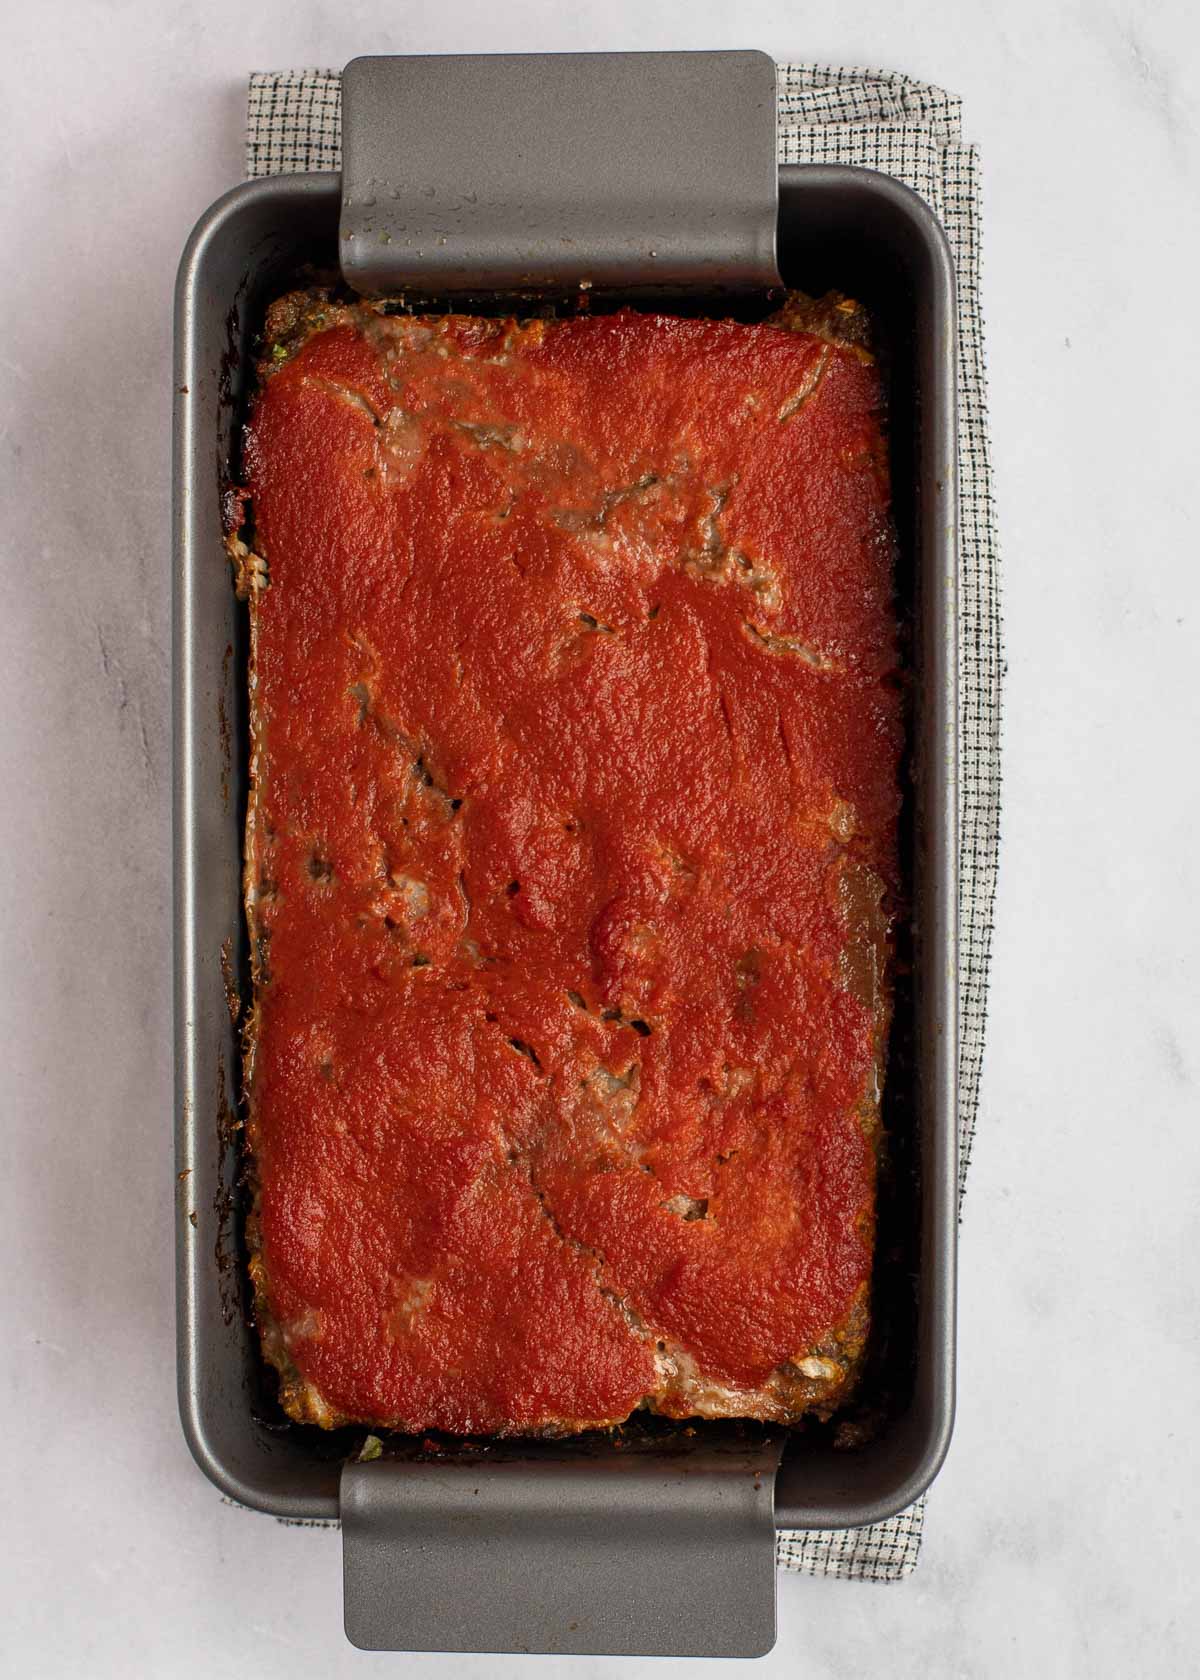 Overhead view of a baked meatloaf in a loaf pan, covered in sauce